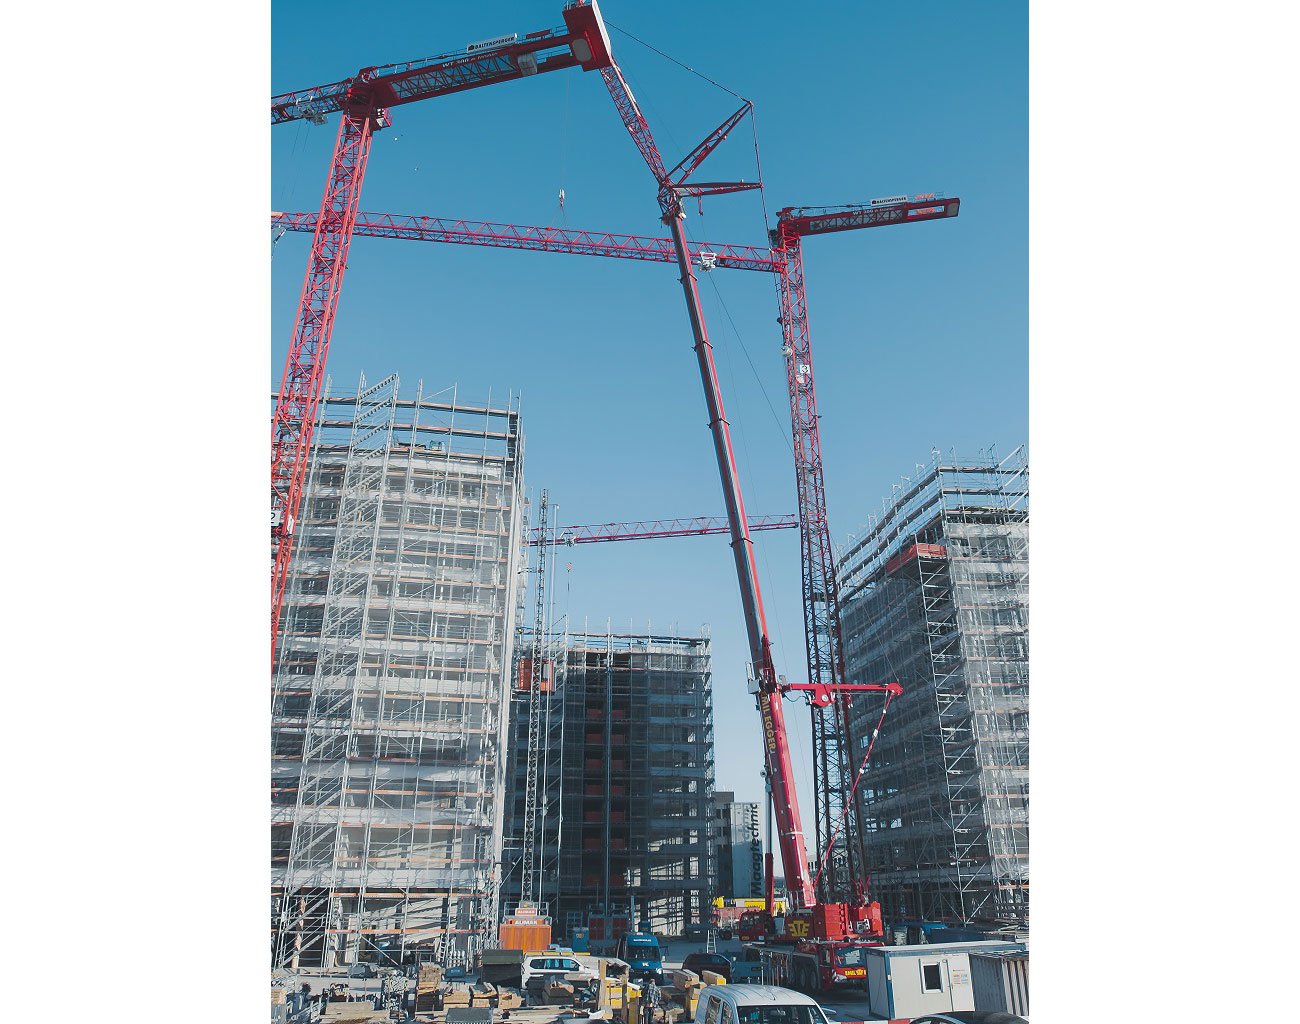 Tadano AC 7.450-1 owned by Emil Egger AG erects tower cranes